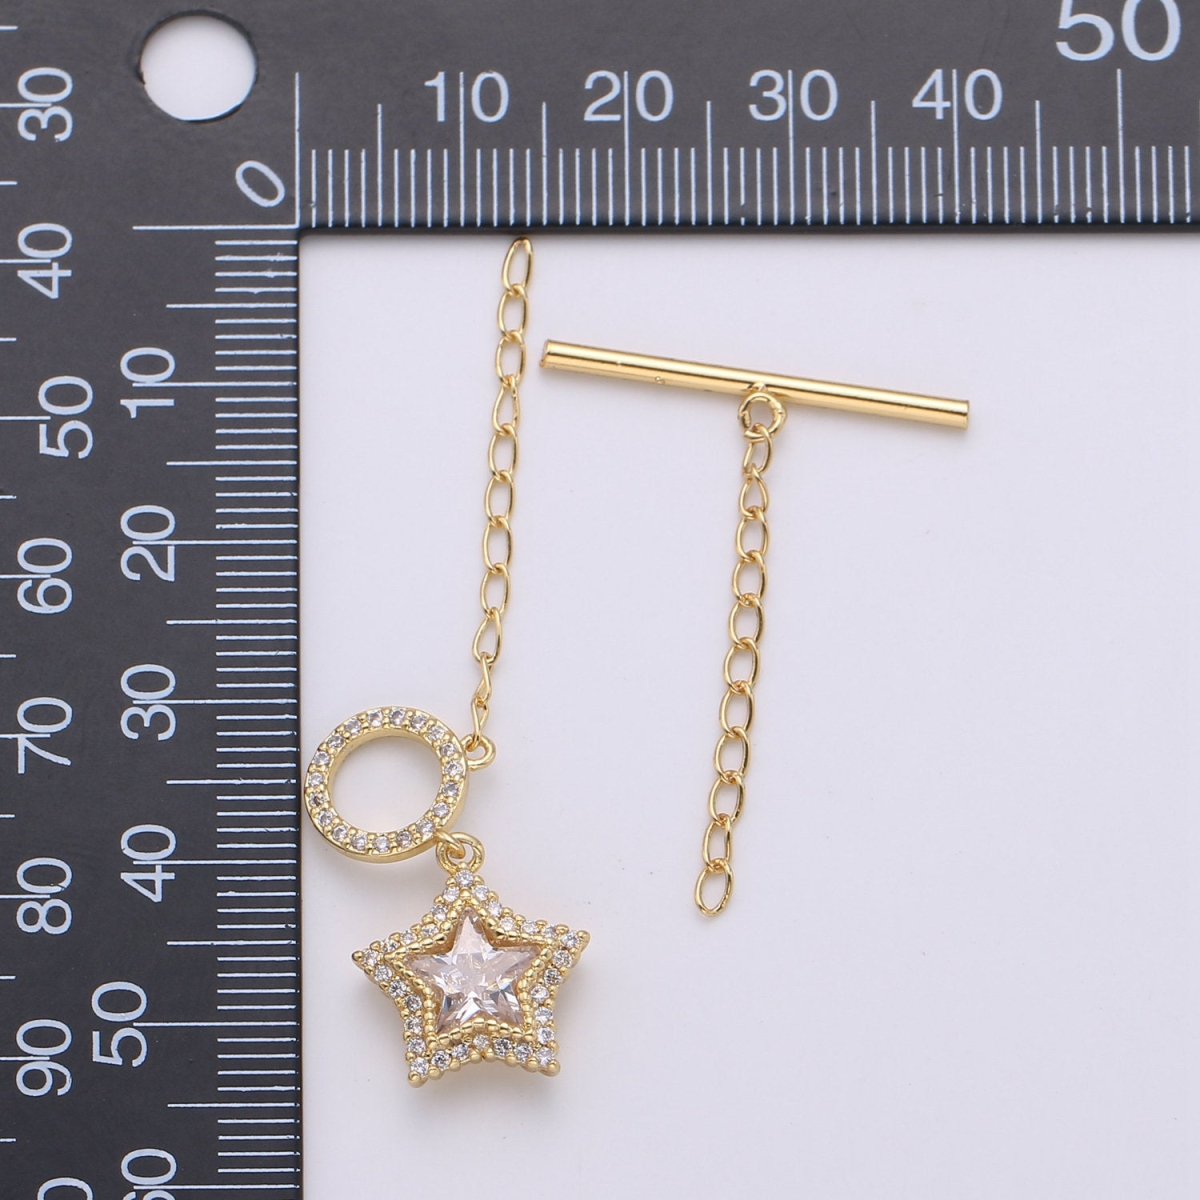 Star Pave CZ Toggle Clasp Silver, 24K Gold Filled Toggle Clasp Micro Pave Clear CZ OT Toggle Clasp, For Necklacet/Bracelet Jewelry Supplies K-450 K-451 - DLUXCA